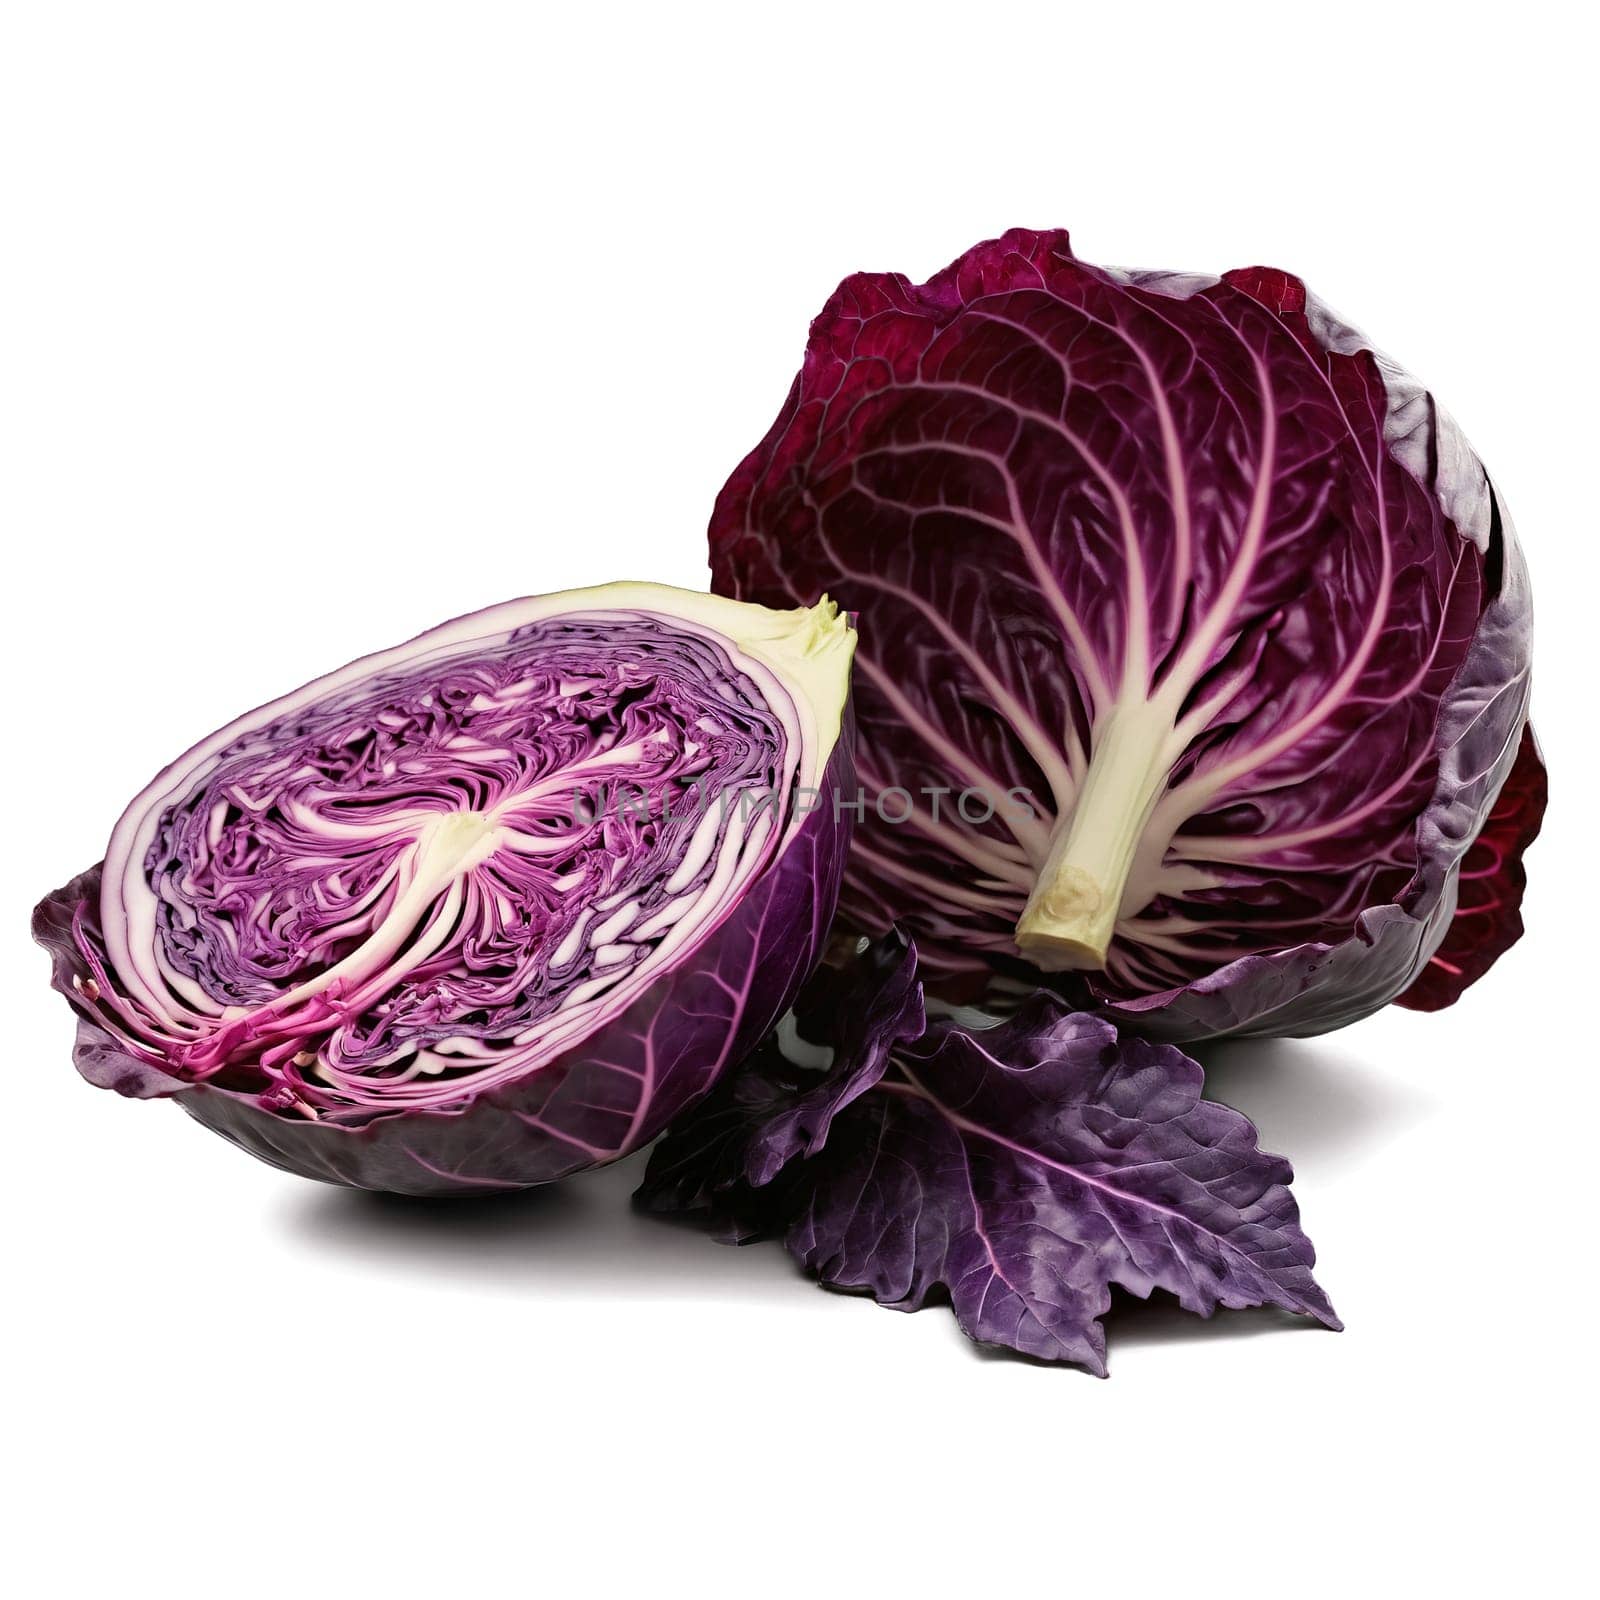 Tangy red cabbage shredding purple leaves fluttering core spinning Brassica oleracea var capitata f rubra by panophotograph